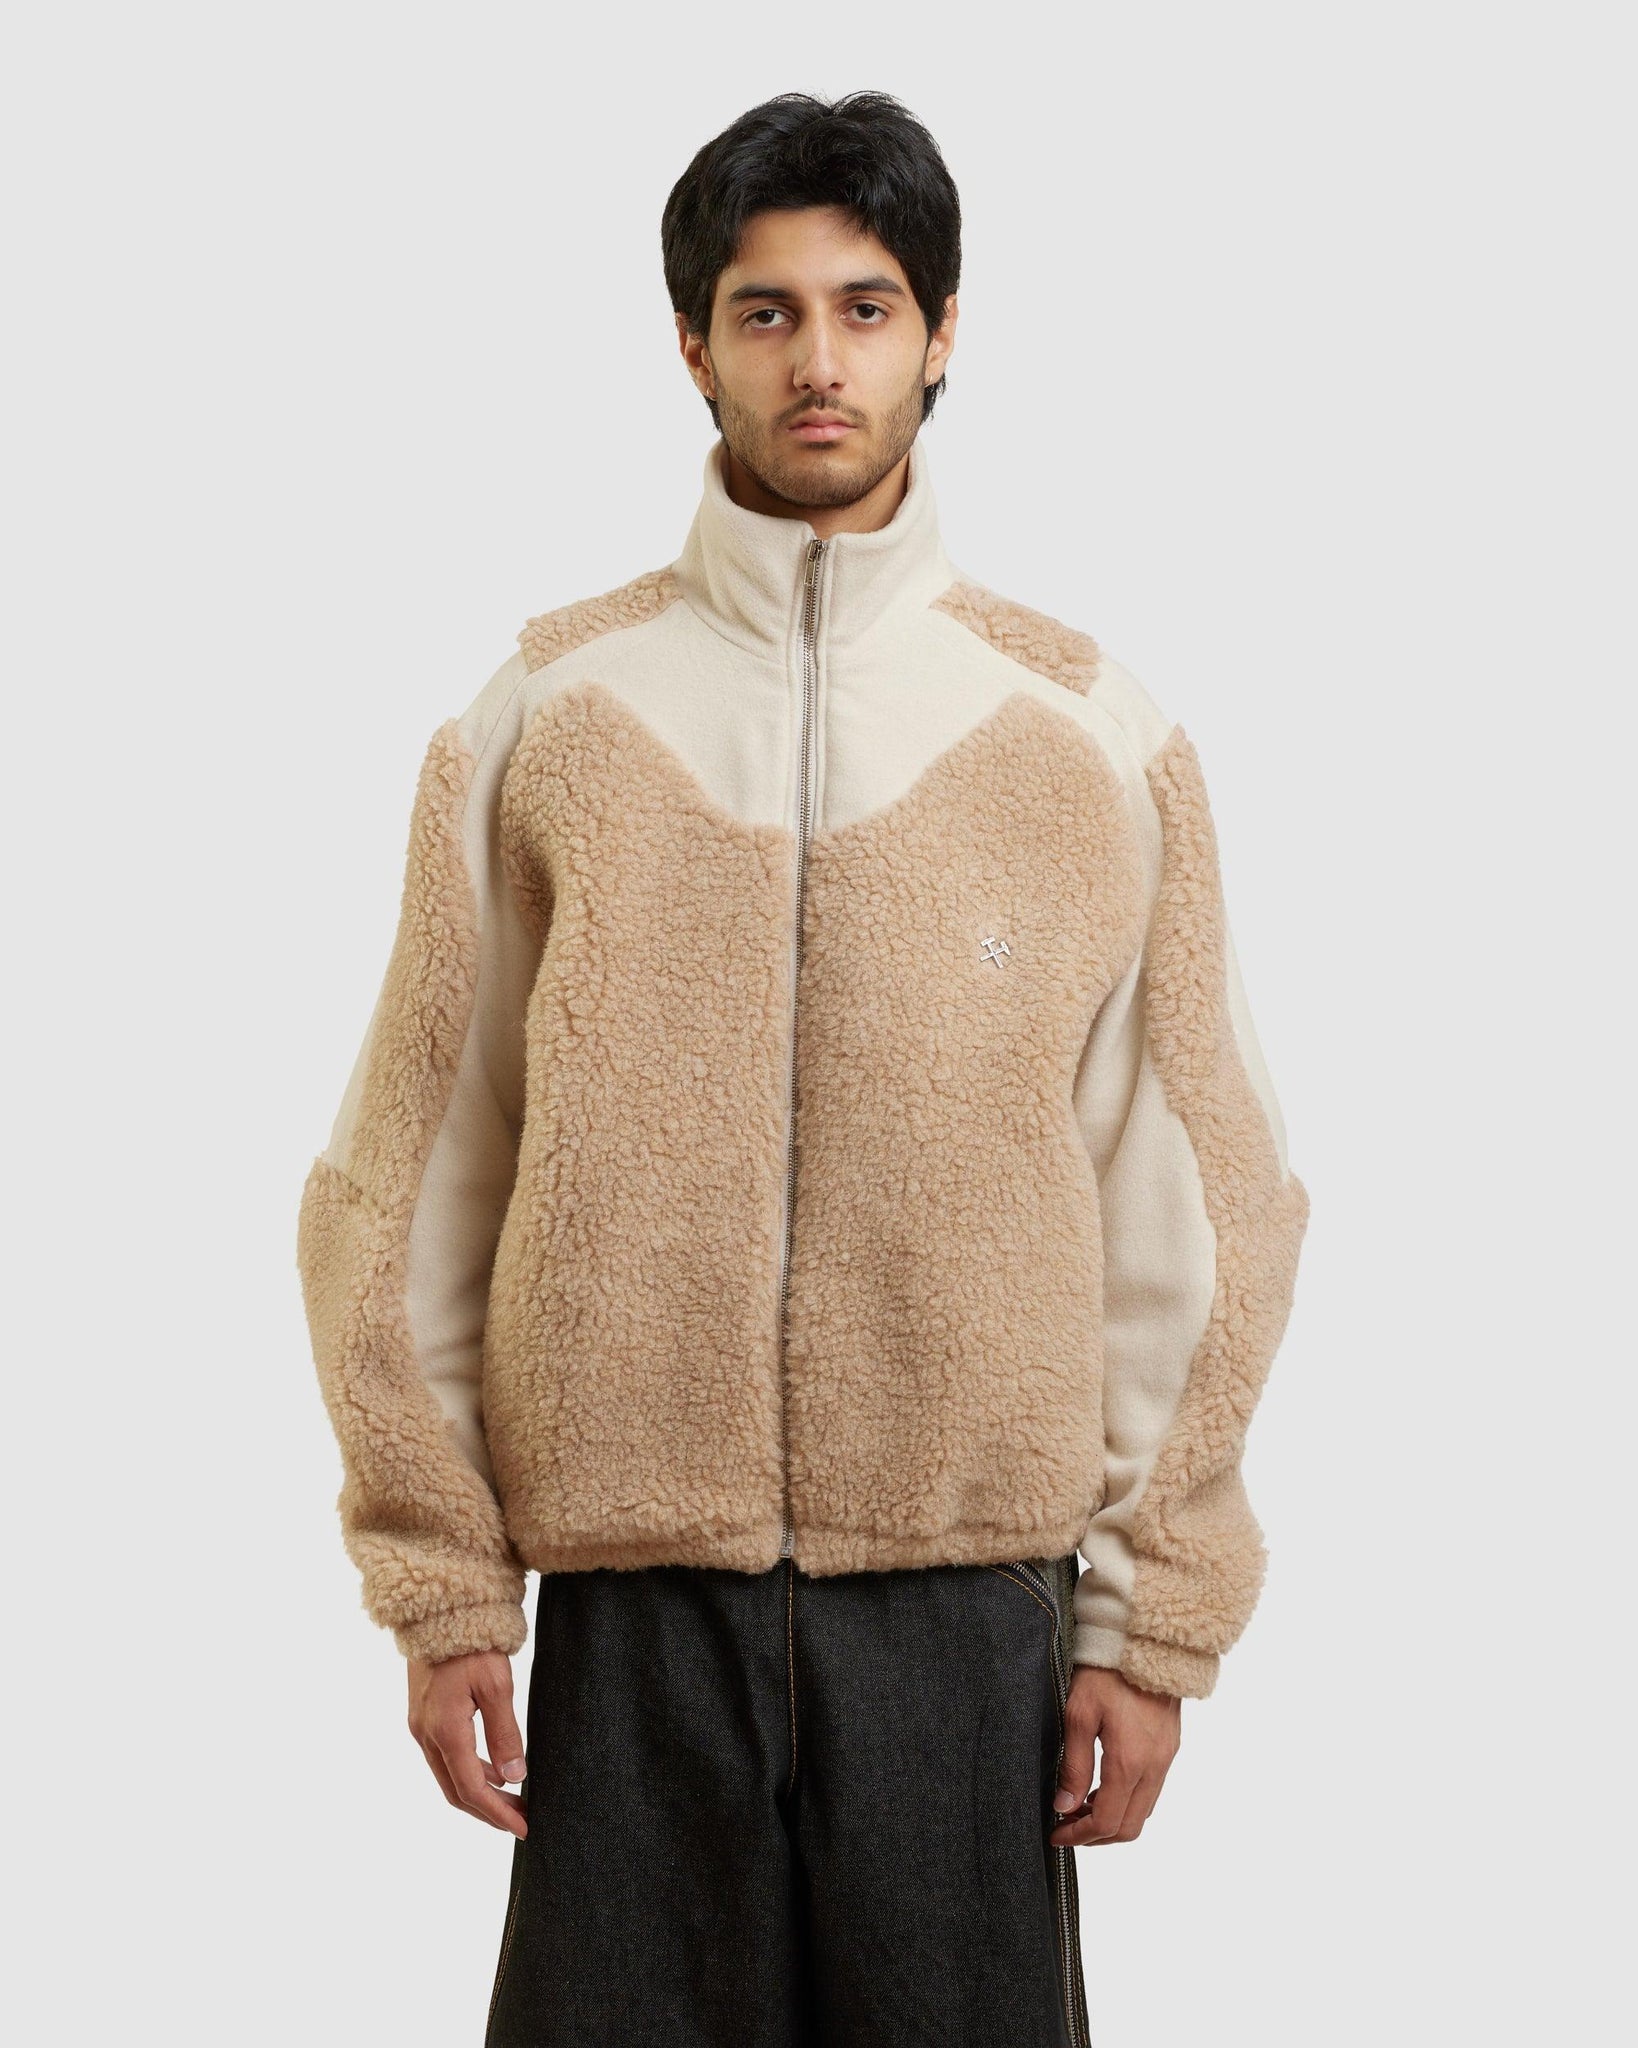 Two-Tone Fleece Jacket Grey With Beige - {{ collection.title }} - Chinatown Country Club 